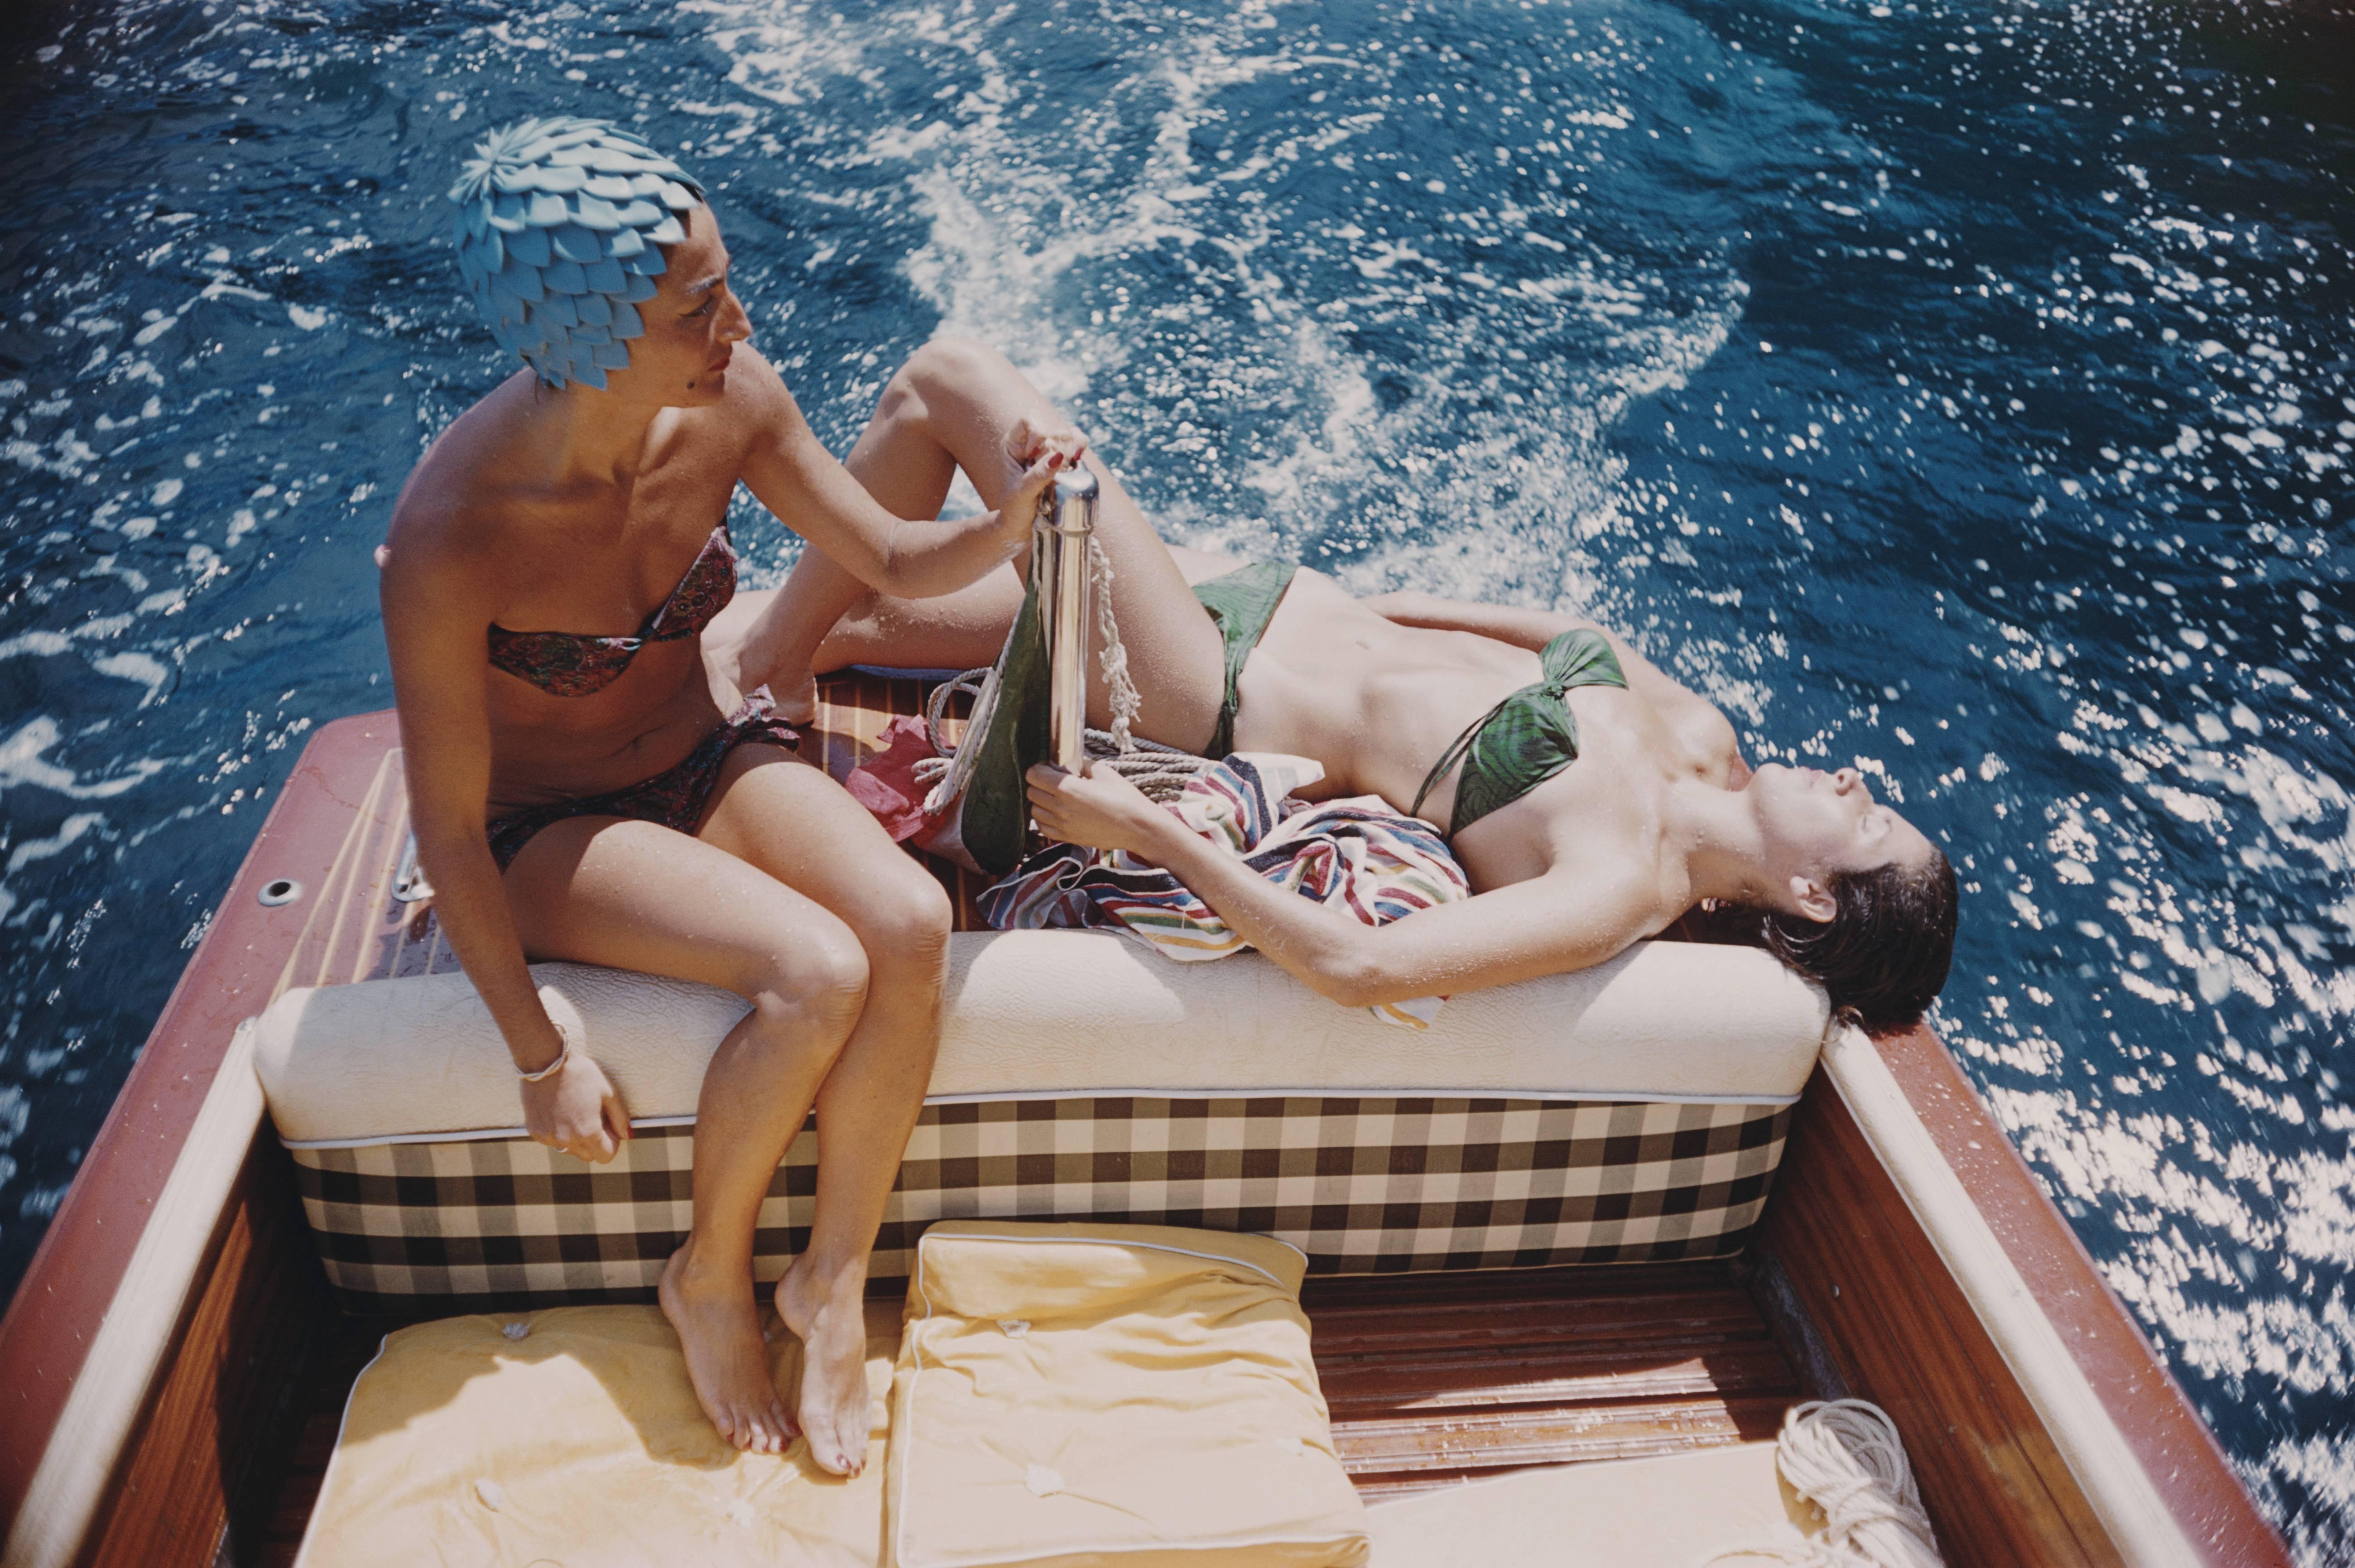 Carla Vuccino, wearing a swimming cap, and a sunbathing Marina Rava, both wearing bikinis as they sit on the rear of a boat, on the waters off the coast of the island of Capri, Italy, 1958 . (Photo by Slim Aarons/Getty Images)

C-type print from the